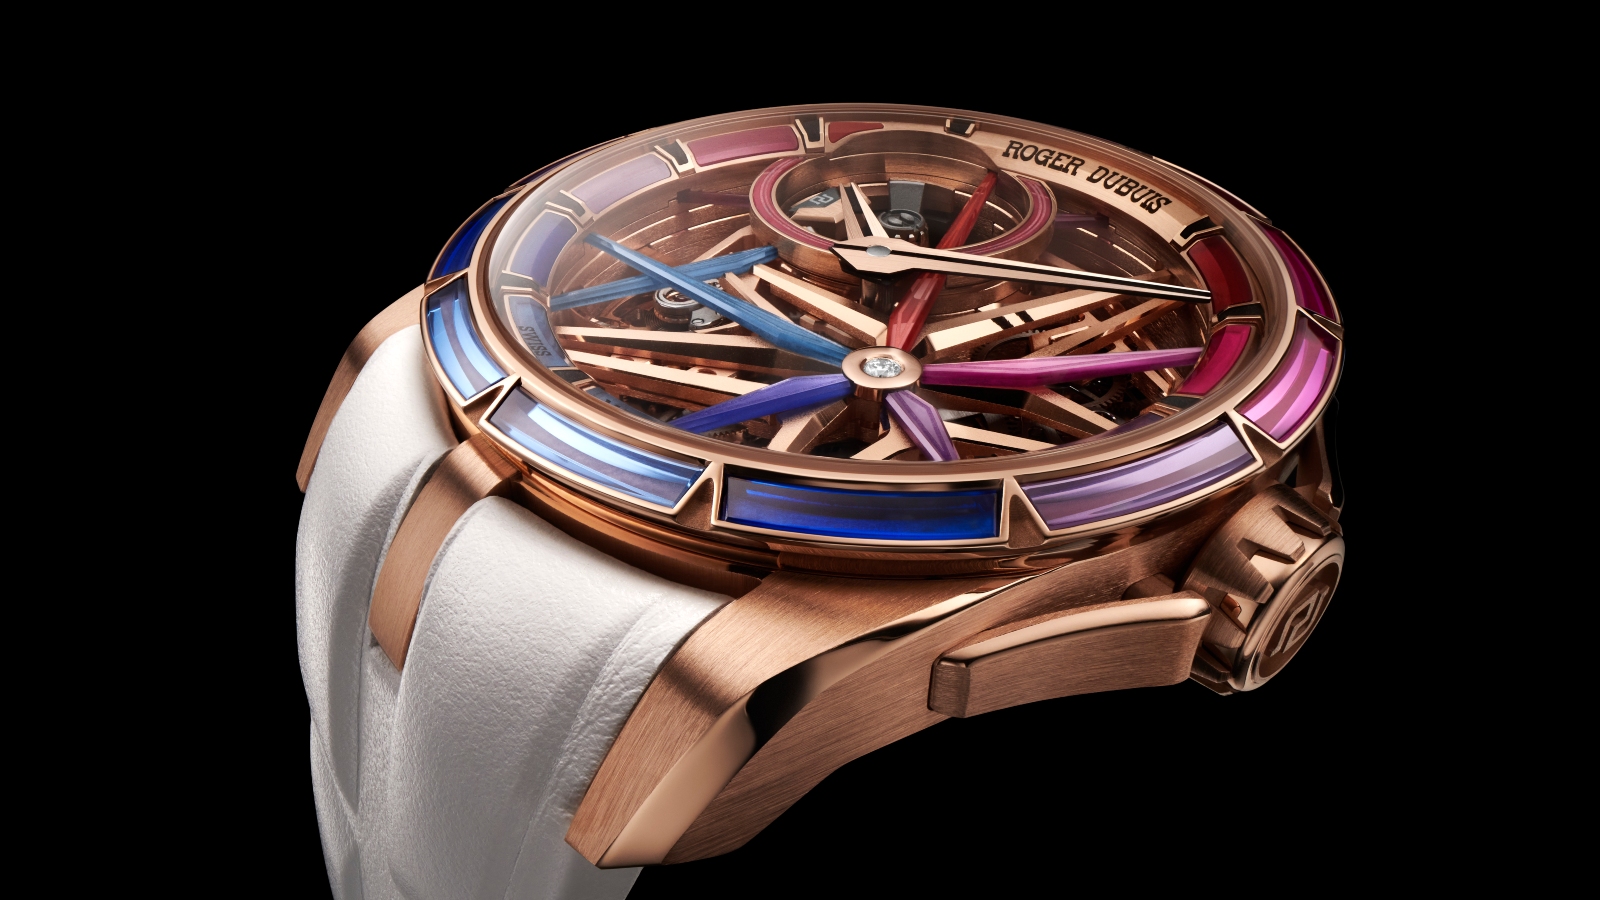 Luxury watch brand Roger Dubuis launches first local standalone